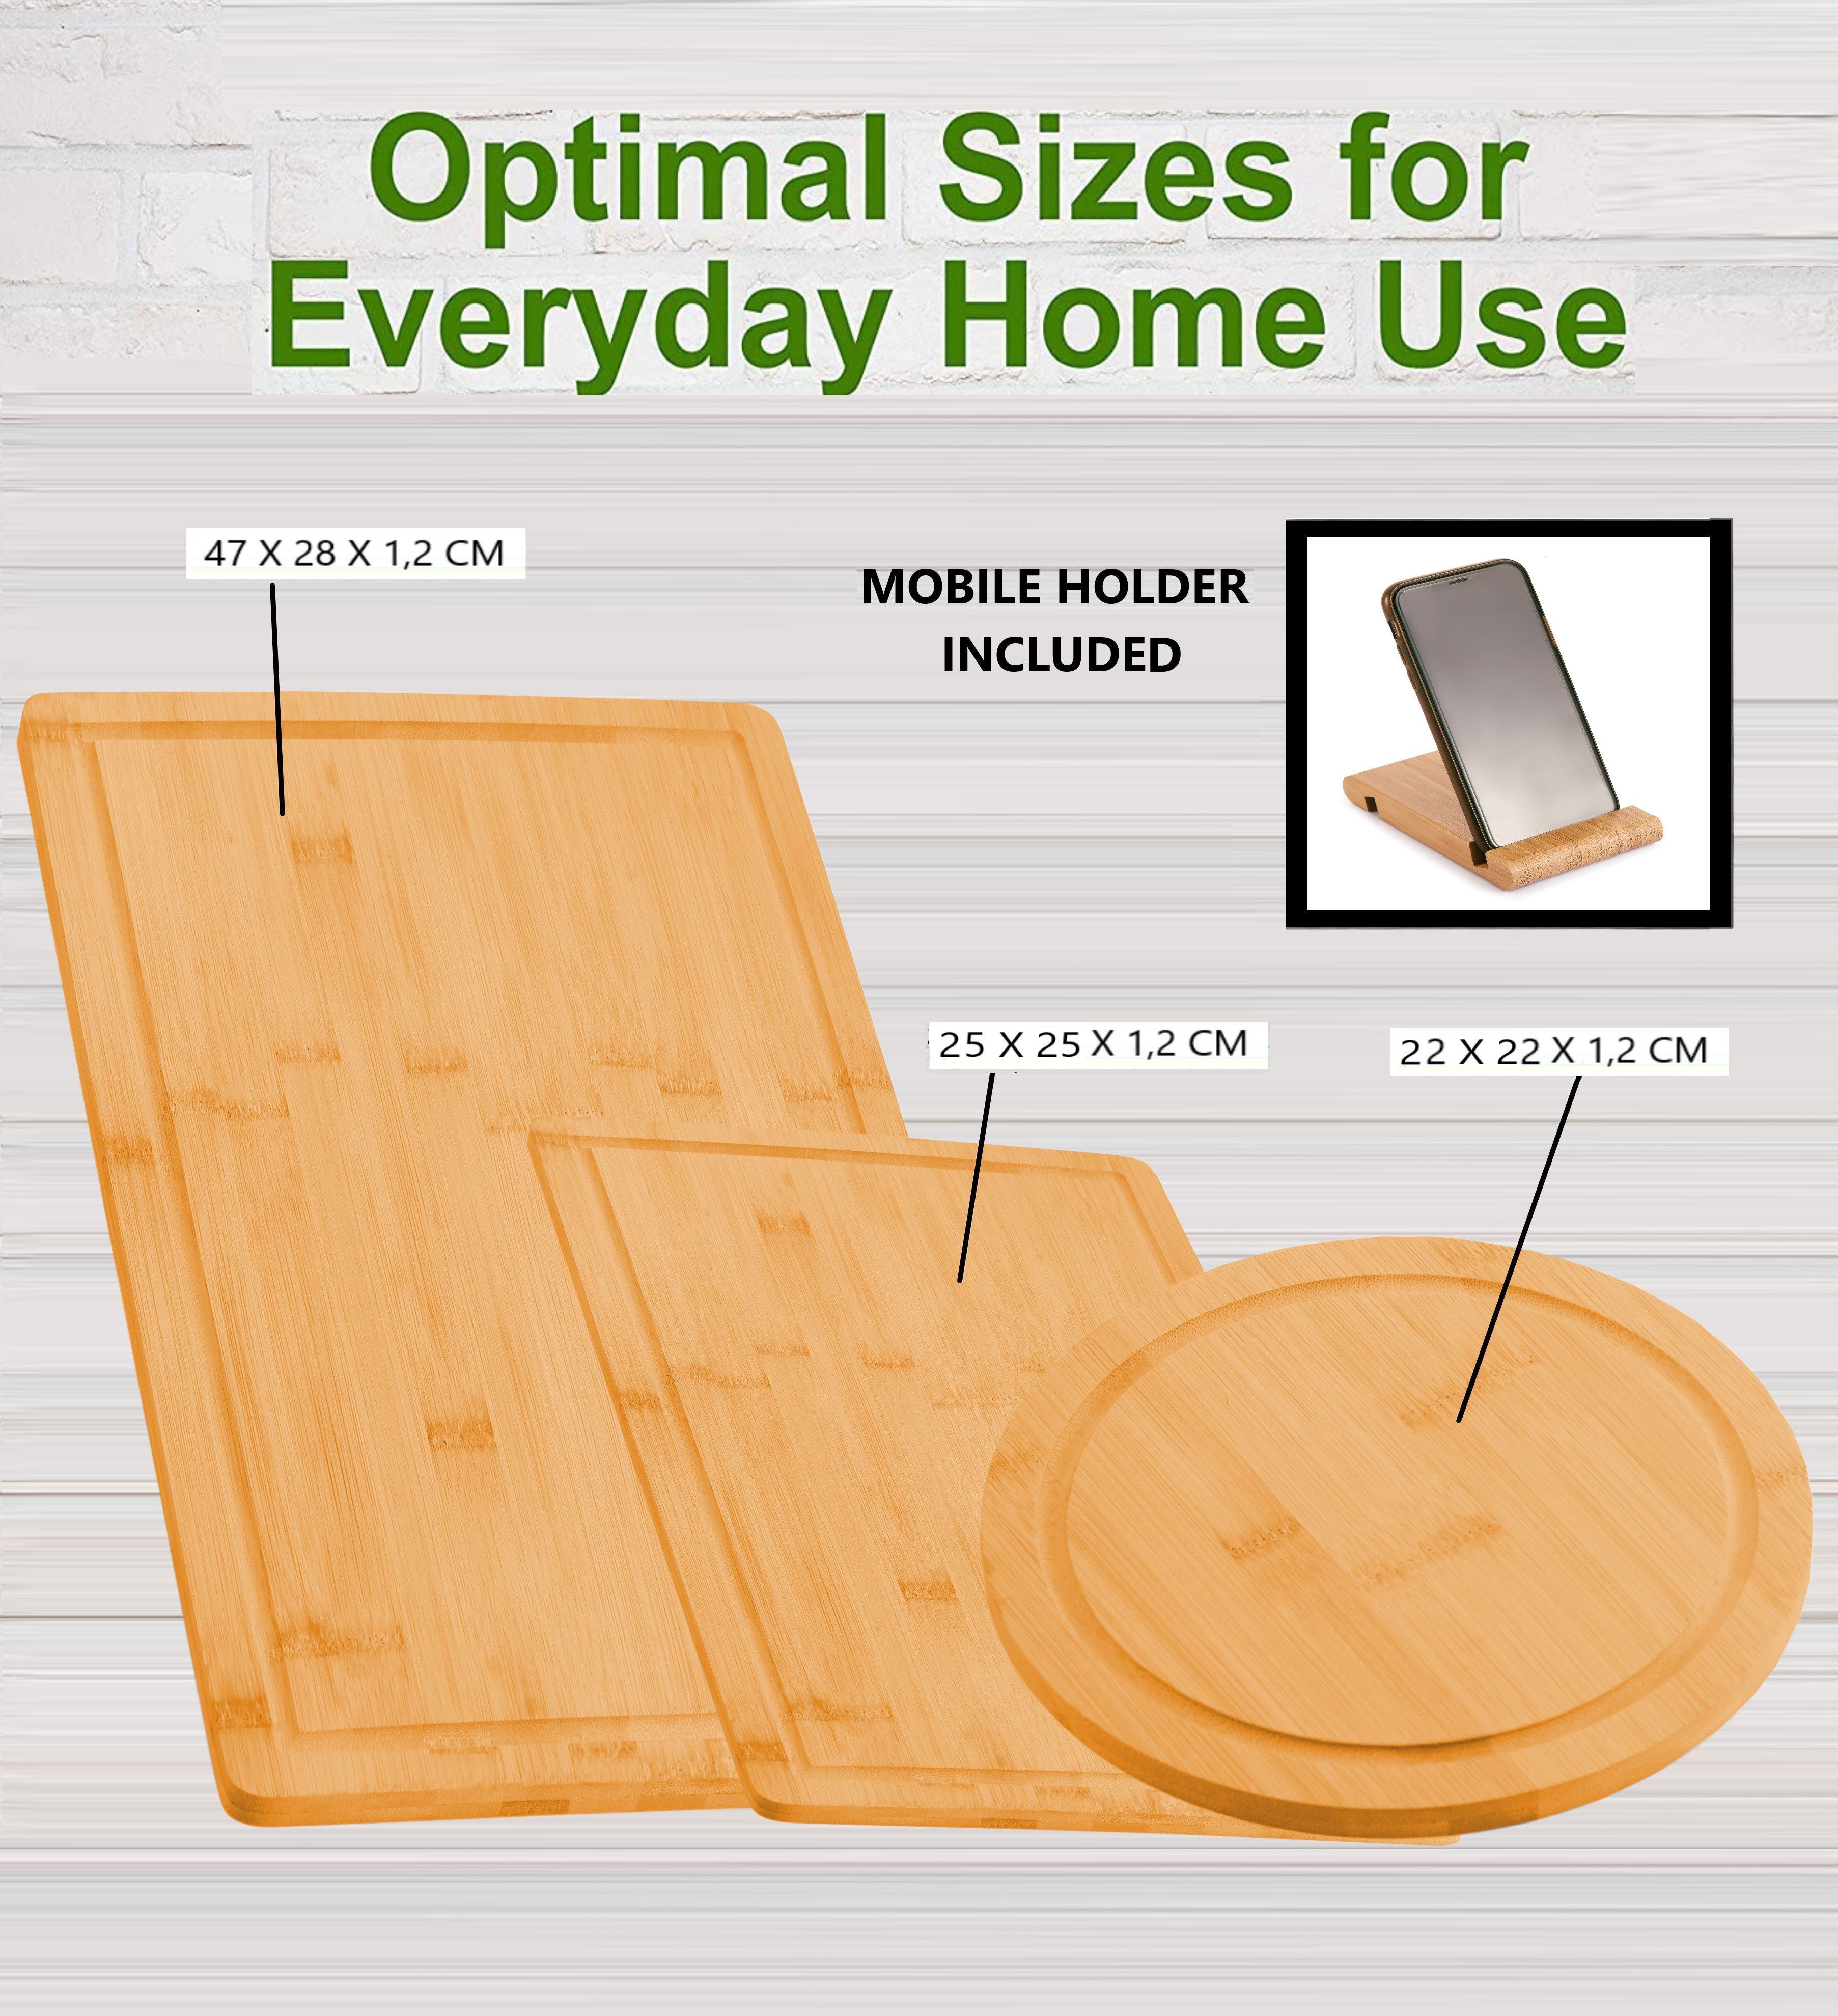 3-pieces-bamboo-cutting-board-with-juice-groove-and-mobile-holder-included-for-home-kitchen